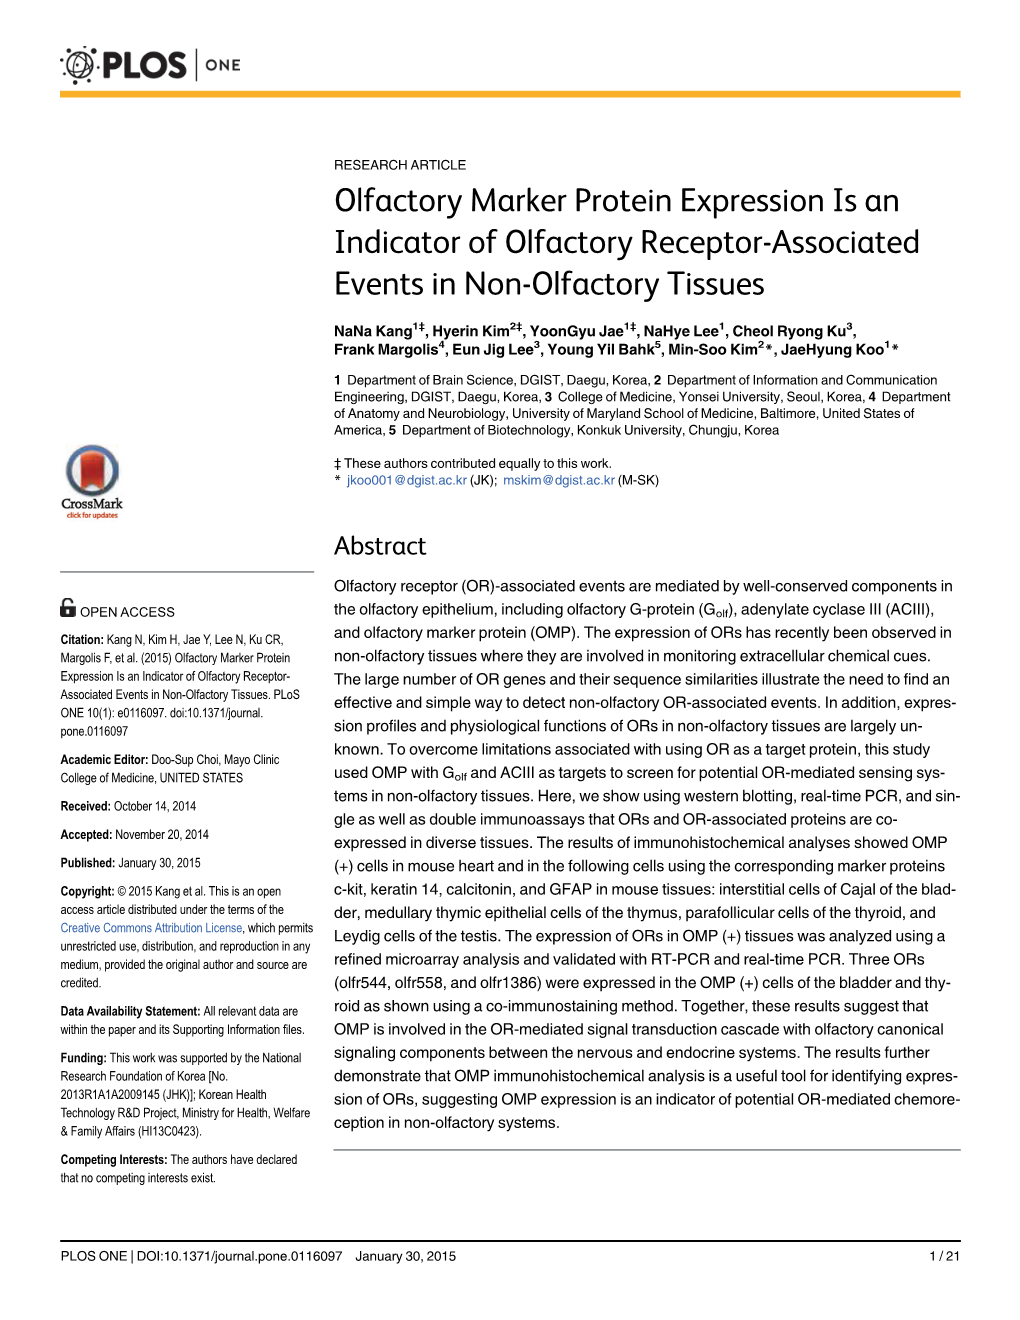 Olfactory Marker Protein Expression Is an Indicator of Olfactory Receptor-Associated Events in Non-Olfactory Tissues